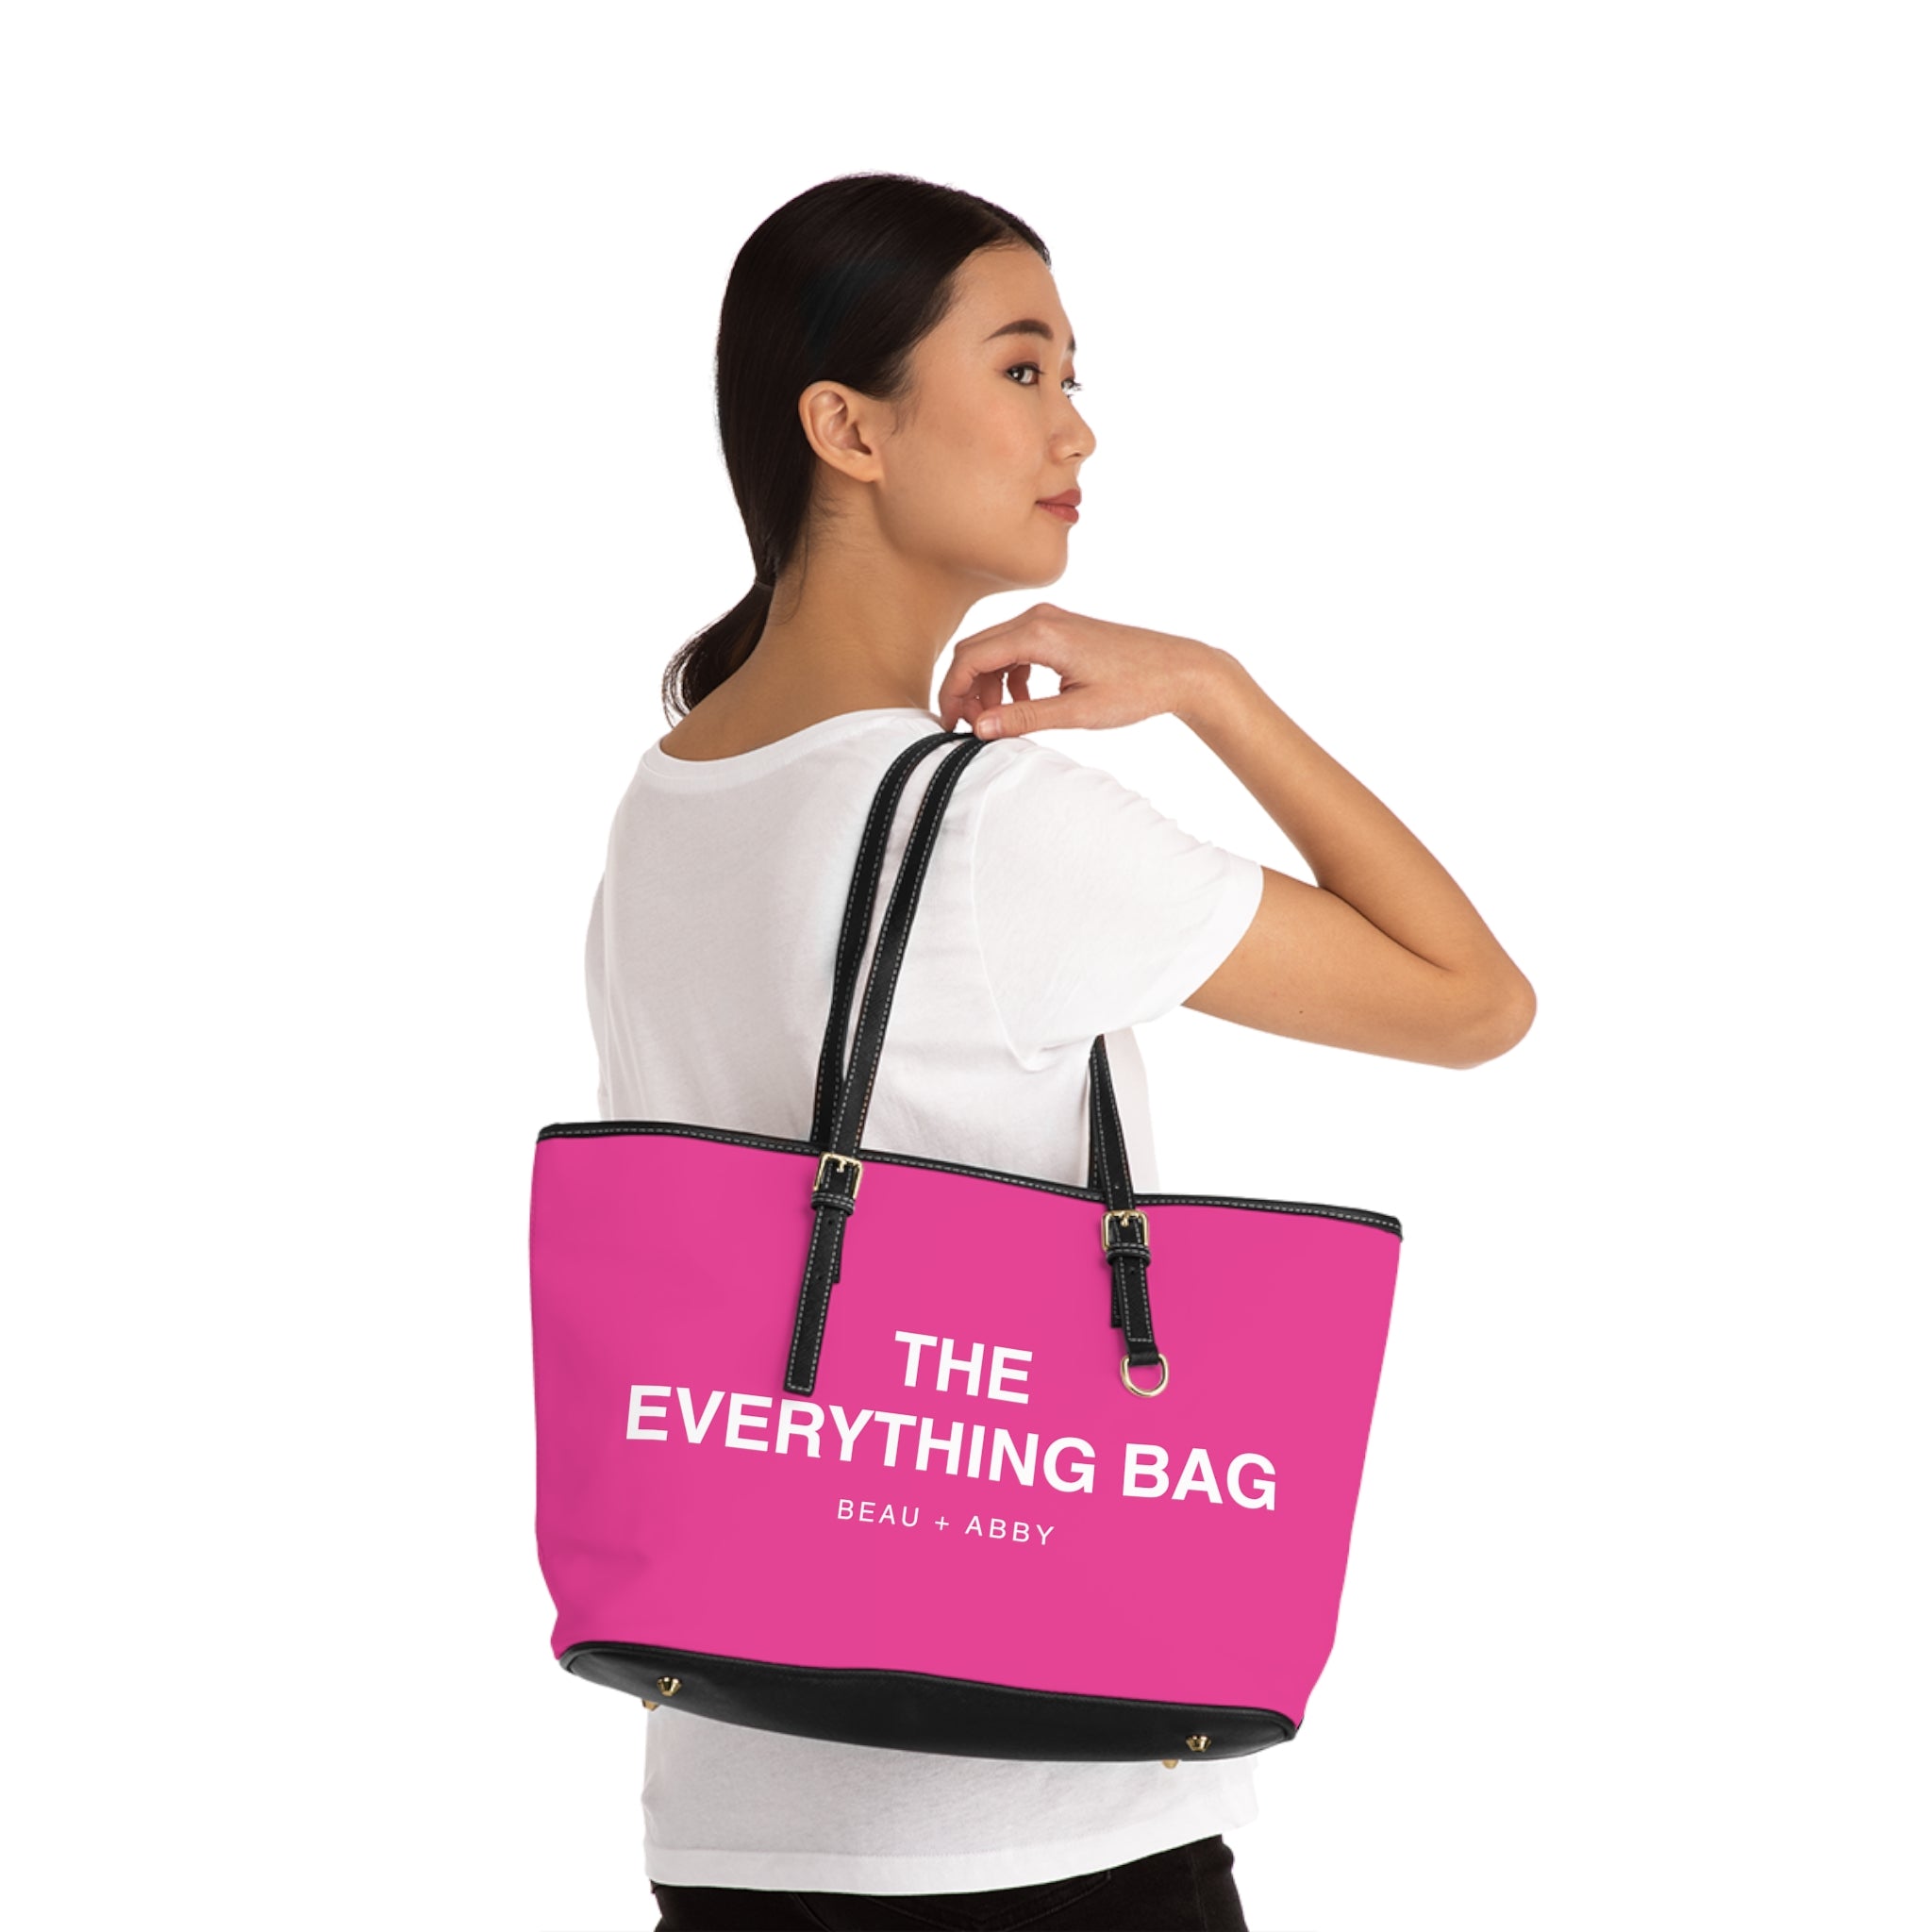  Casual Wear Accessories "Everything Bag" PU Leather Shoulder Bag in Barbie Pink, Tote Bag Bags17x11Black